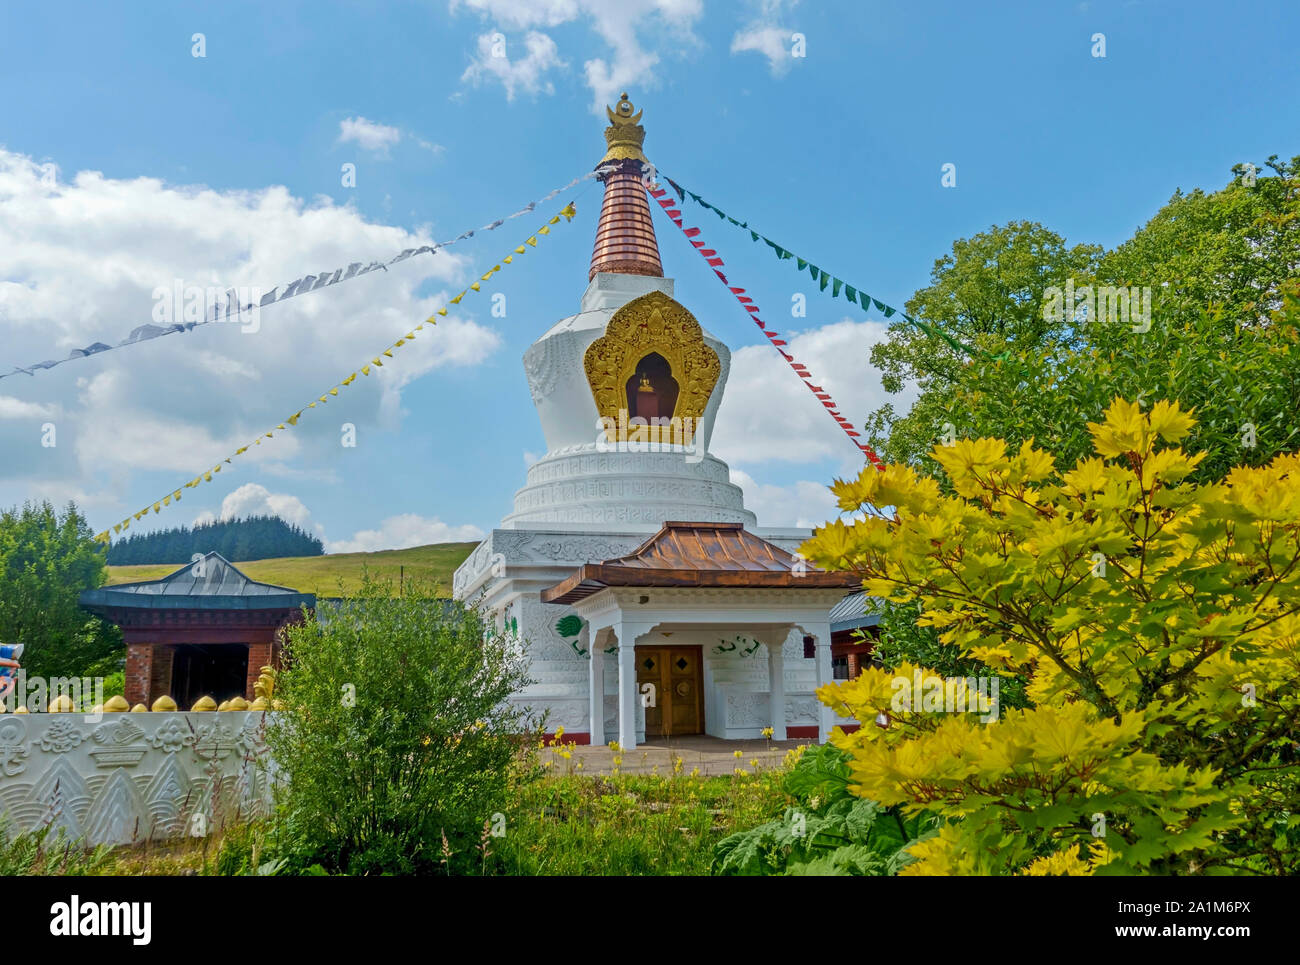 The Samye Ling Victory Stupa for World Peace at the Samye Ling Monastery and Tibetan Centre at Eskdalemuir, Dumfries and Galloway, Scotland. Stock Photo